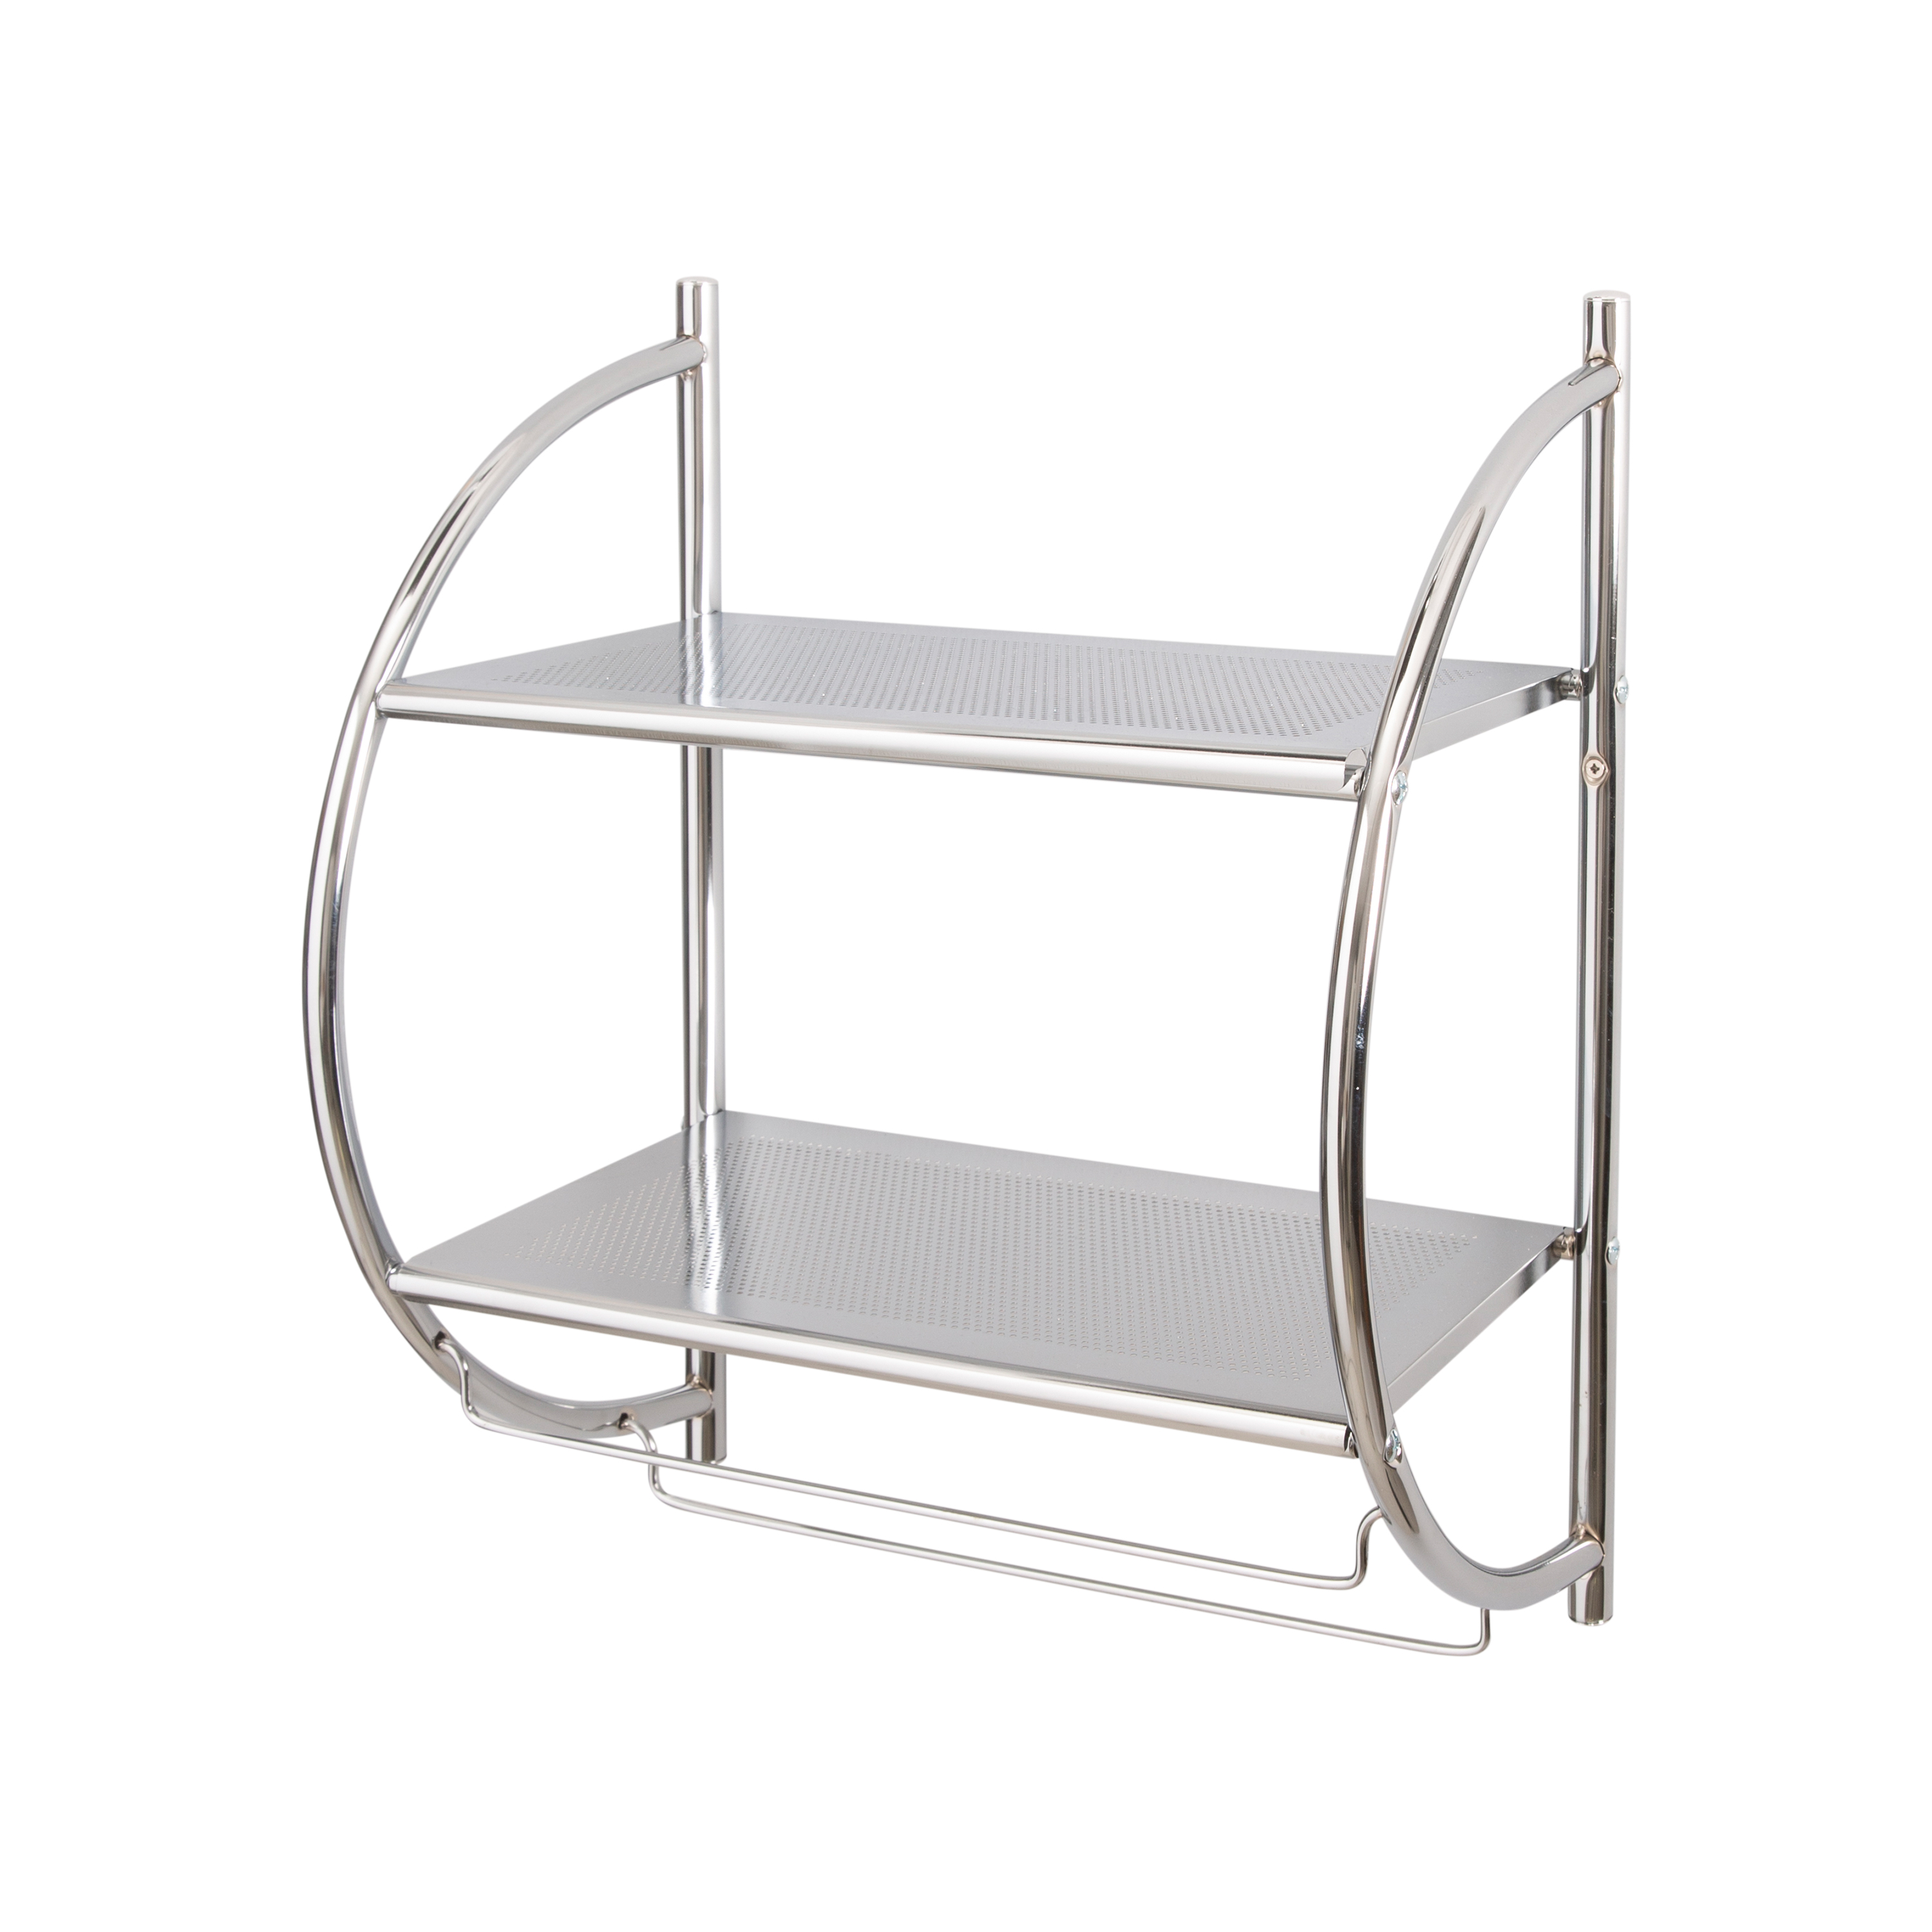 Organize It All 2 Tier Metal Wall Mount Shelf with Towel Bars, Chrome - image 1 of 7